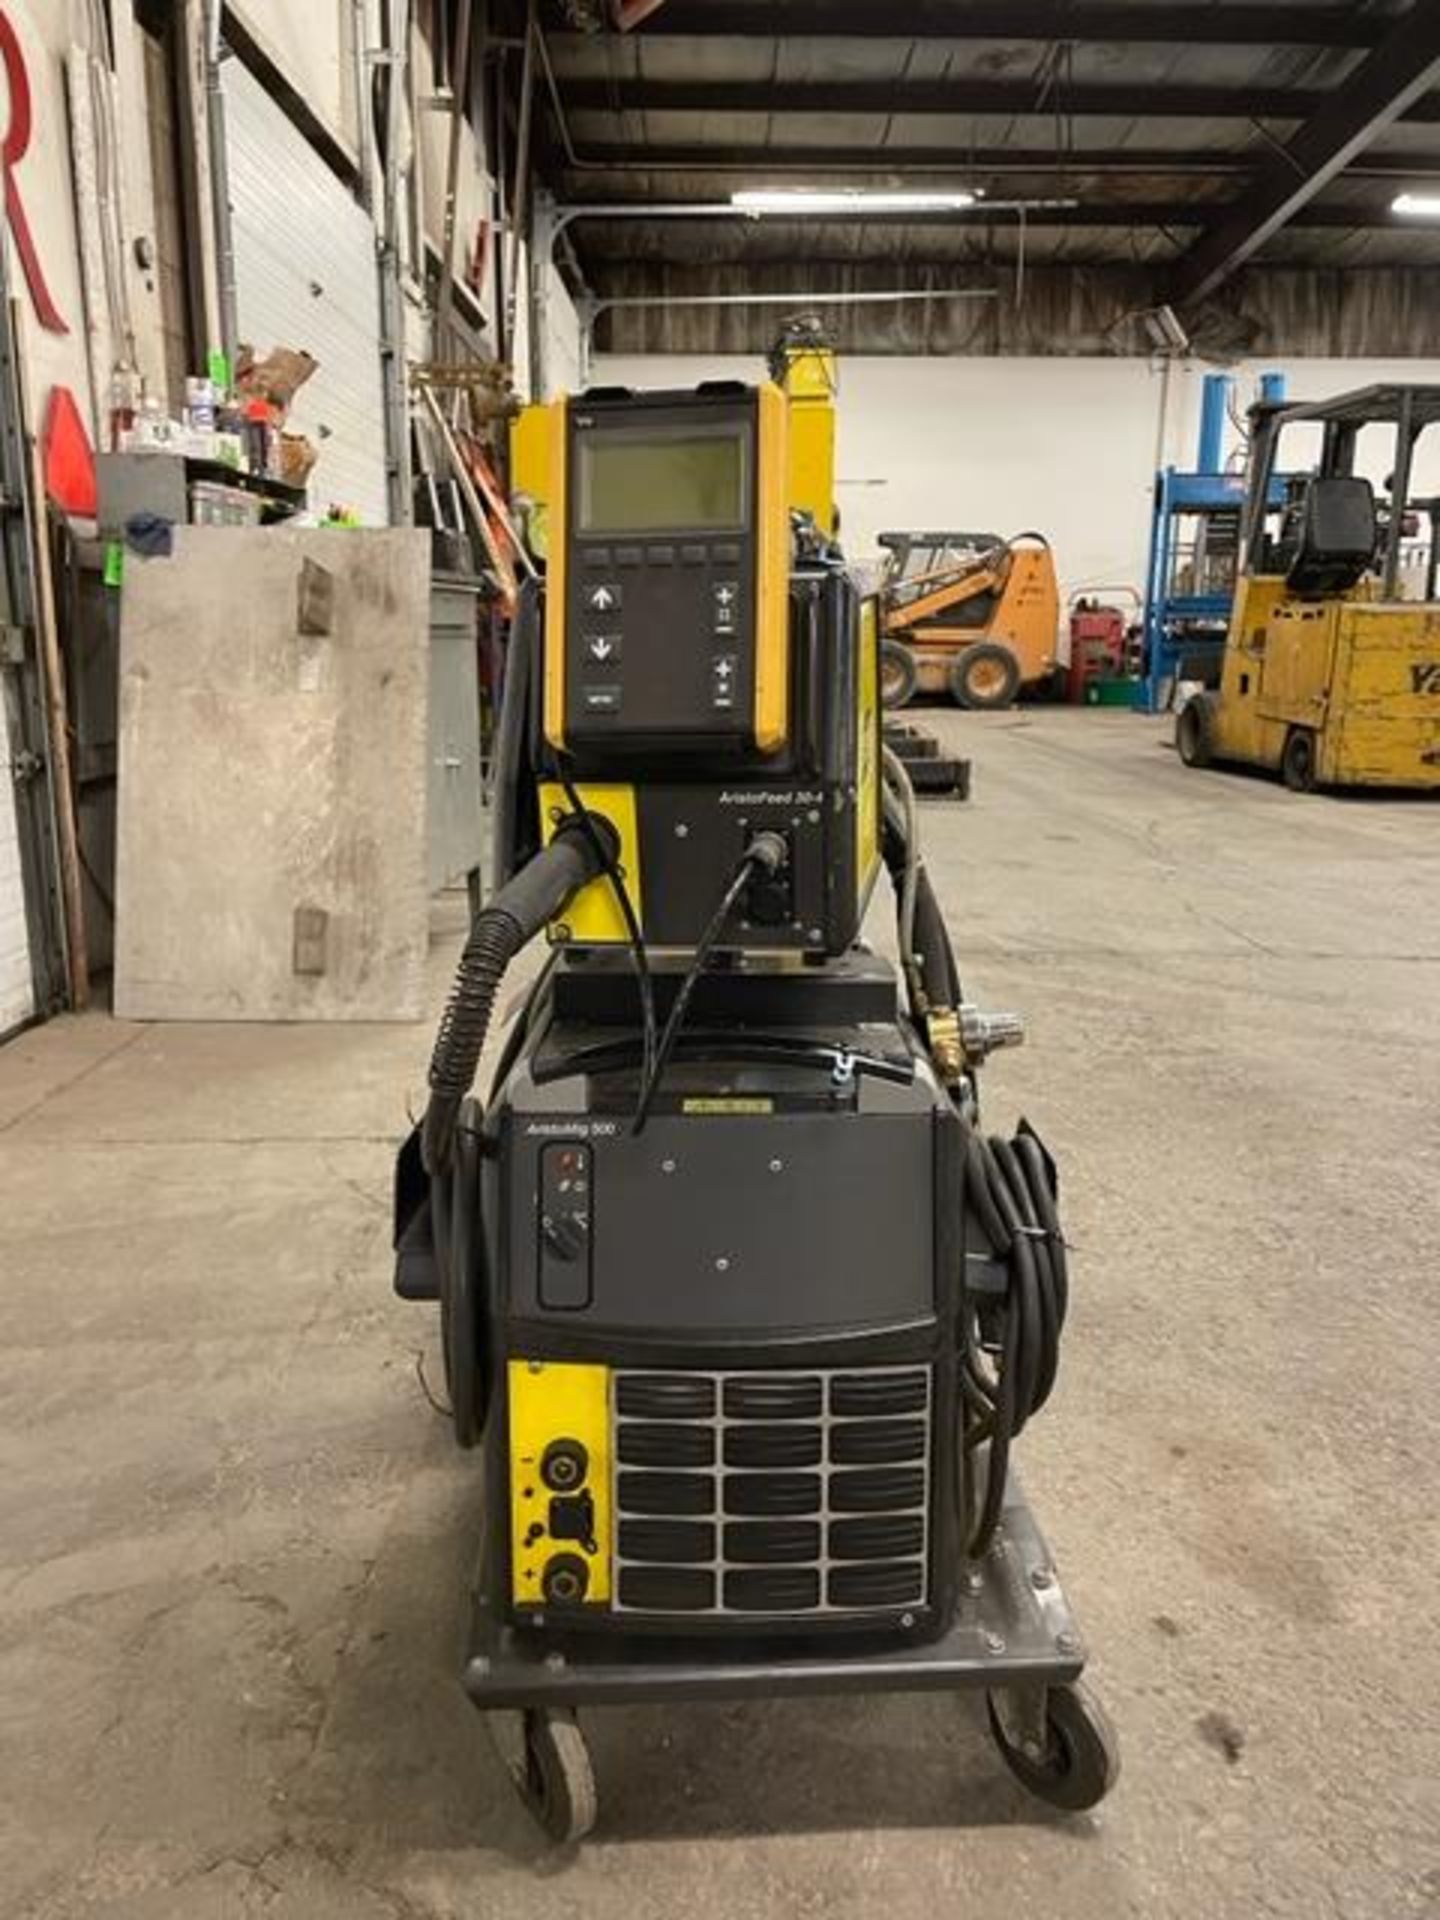 Esab AristoMig 500 Mig Welder Complete with Wire Feeder and Mig gun - 500 amp unit with remote